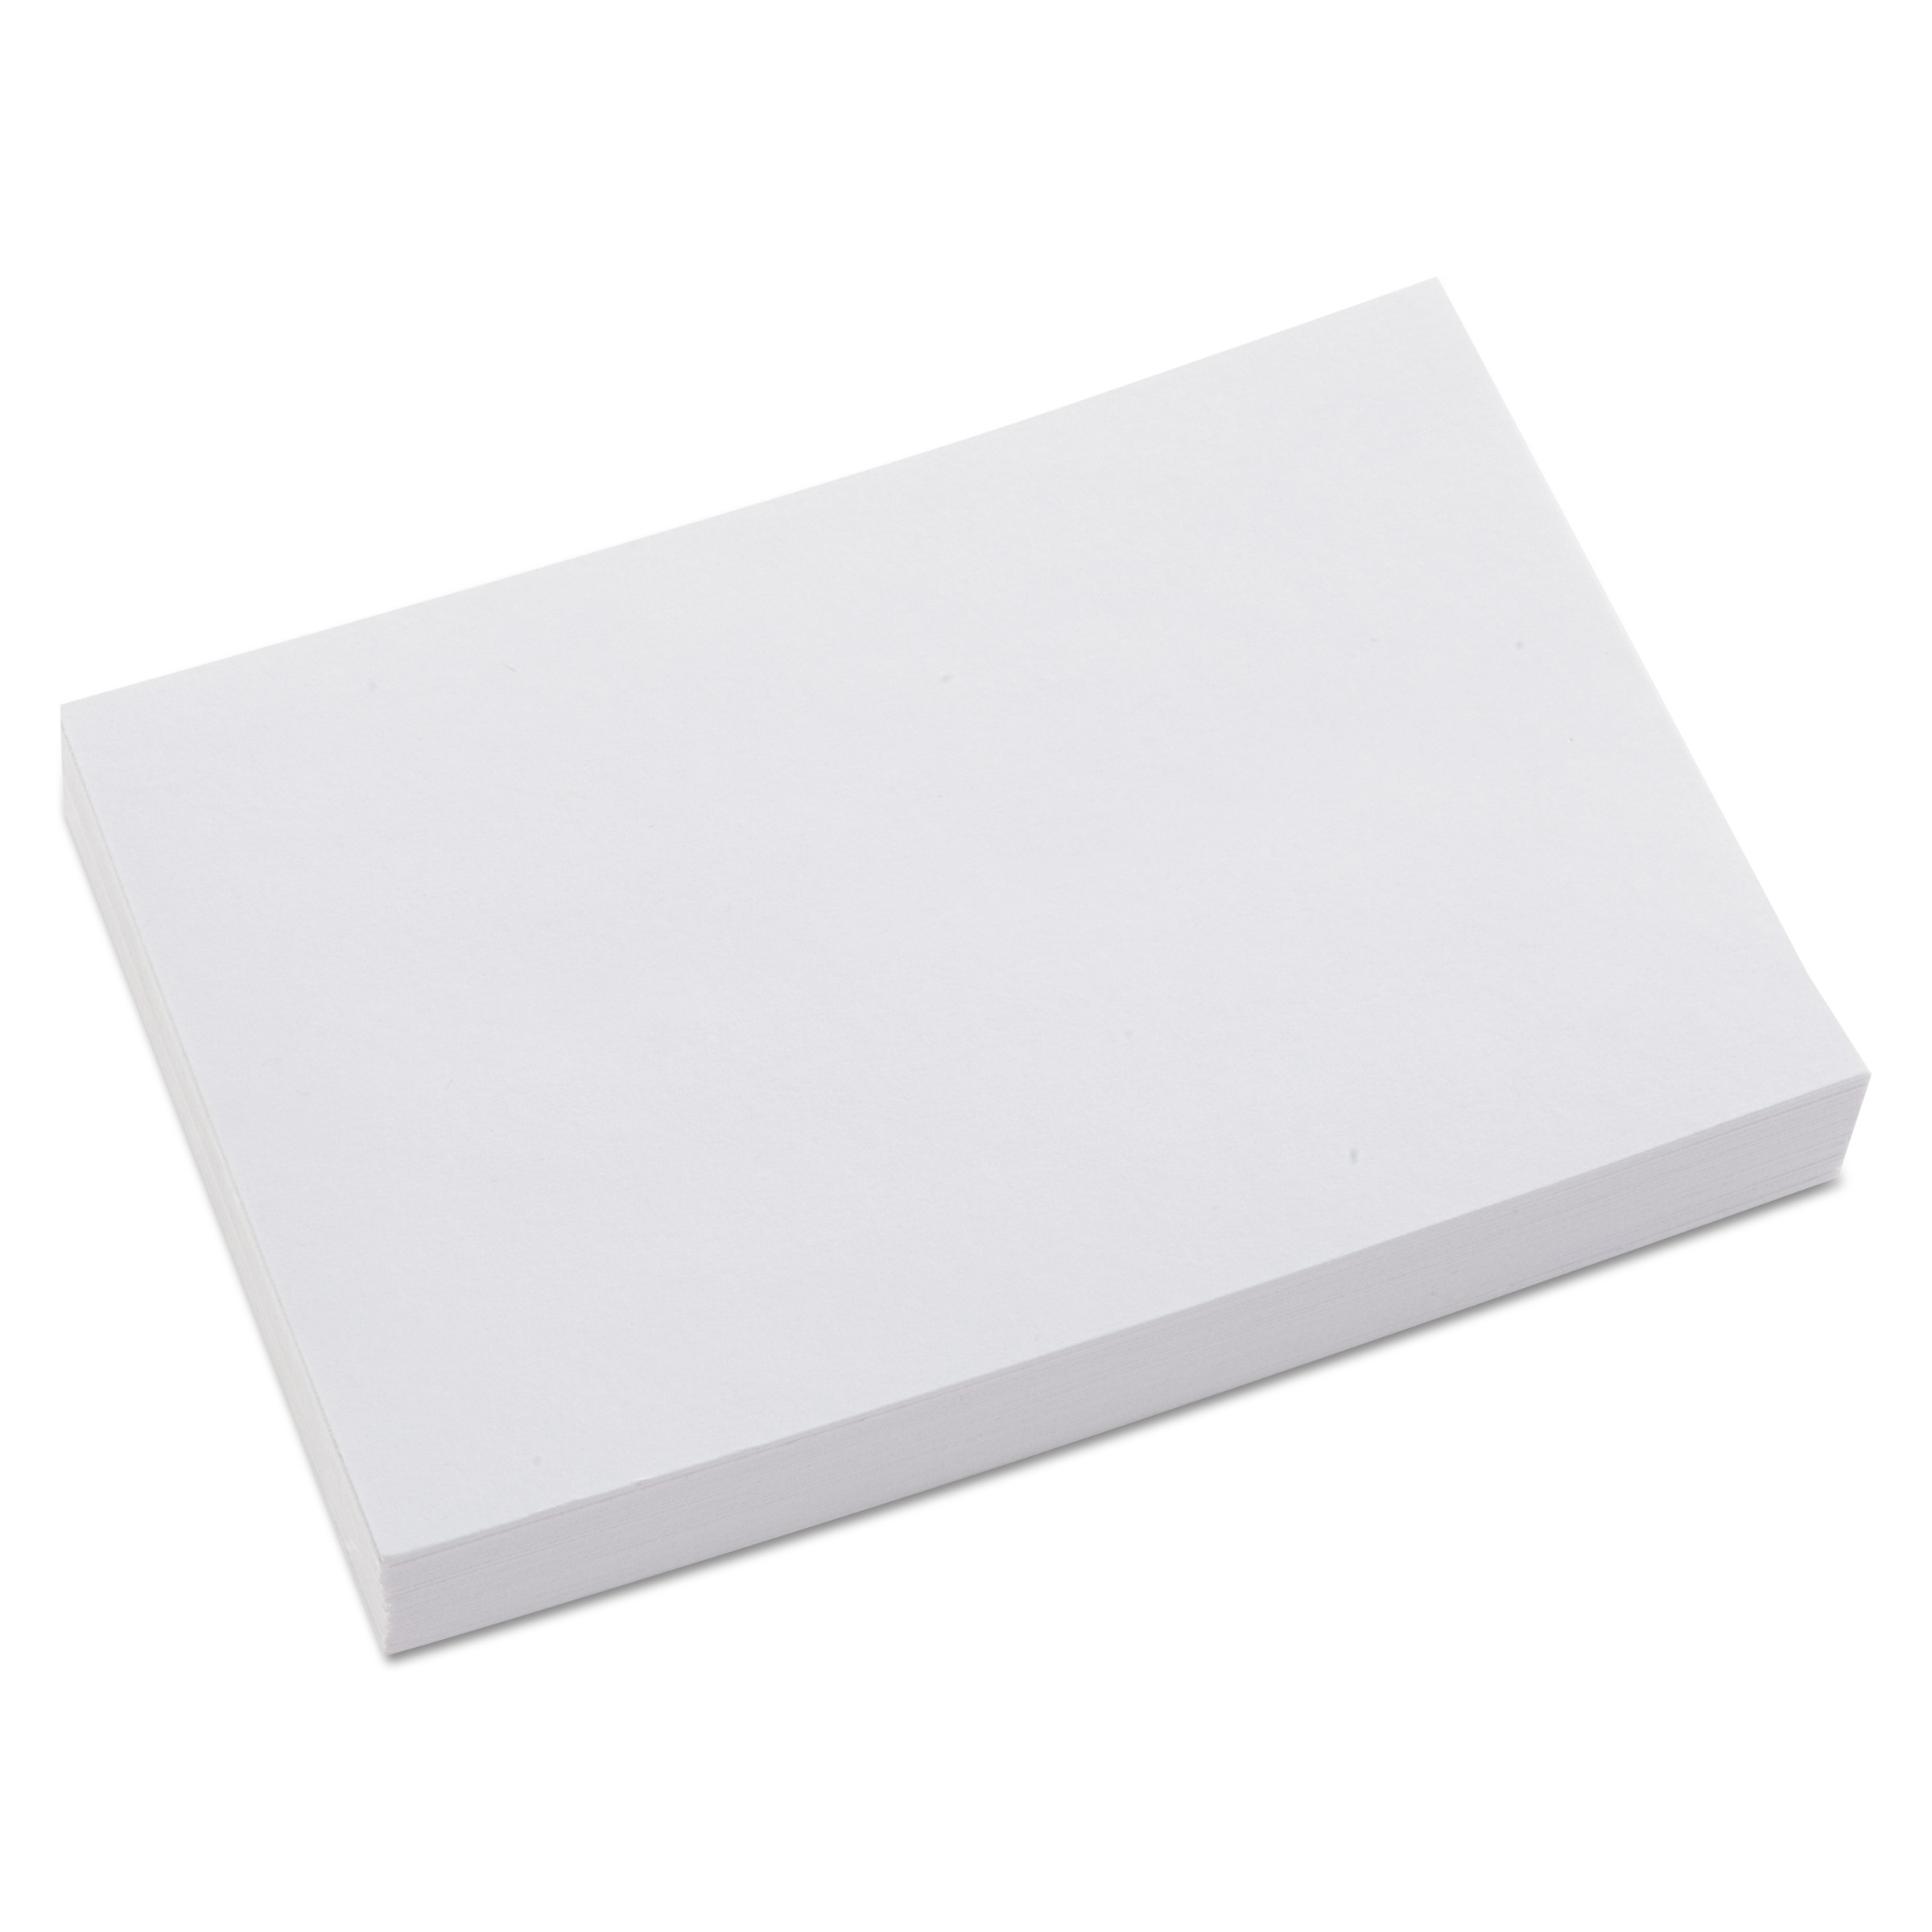  Universal UNV47220EE Unruled Index Cards, 4 x 6, White, 100/Pack (UNV47220) 